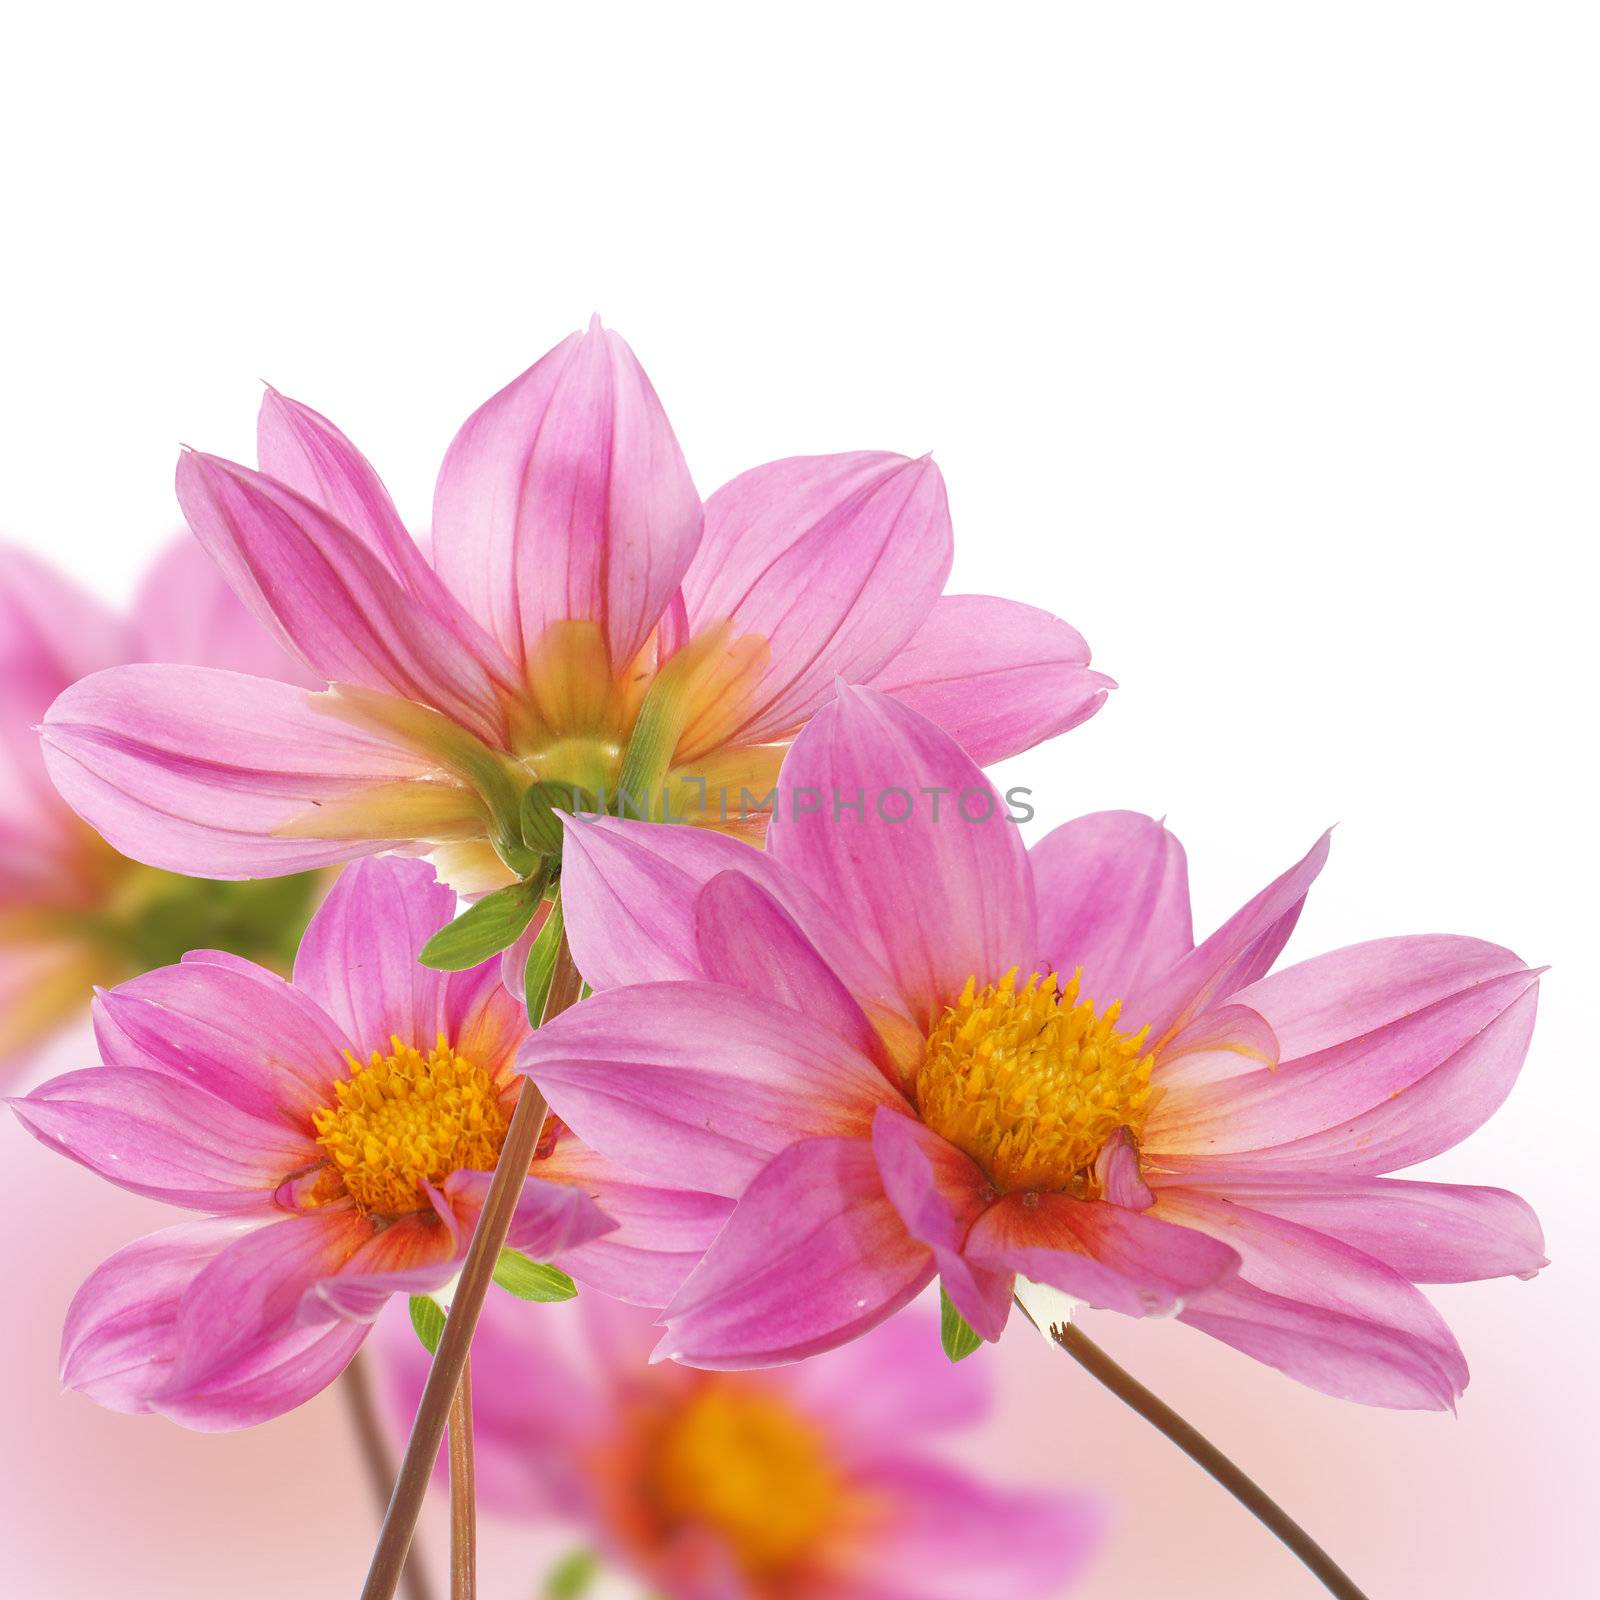 The pink beautiful decorative flowers over white background